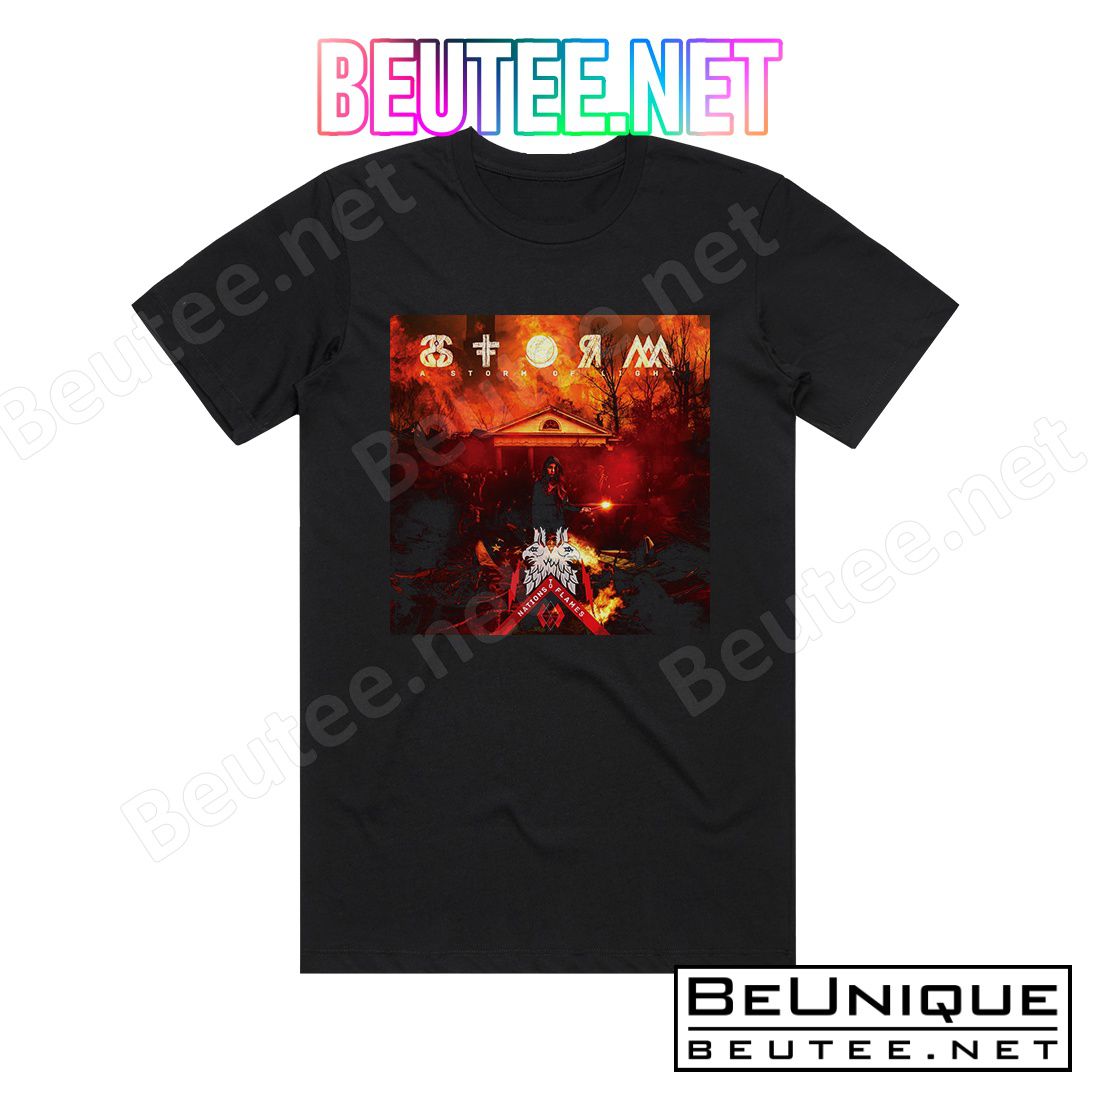 A Storm of Light Nations To Flames Album Cover T-Shirt